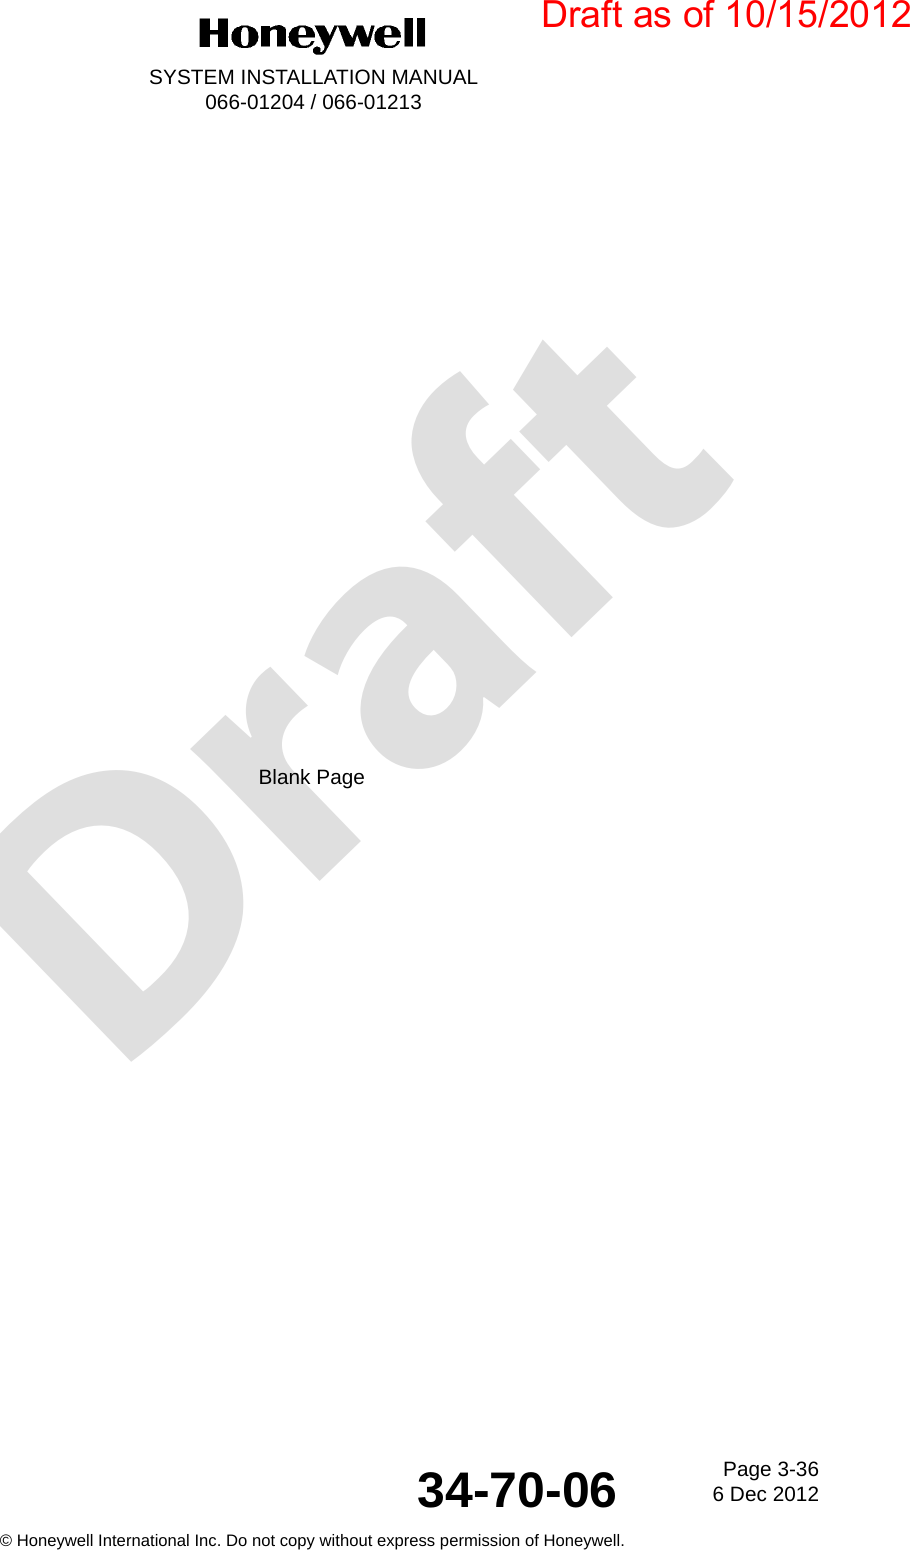 DraftPage 3-366 Dec 201234-70-06SYSTEM INSTALLATION MANUAL066-01204 / 066-01213© Honeywell International Inc. Do not copy without express permission of Honeywell.Blank PageDraft as of 10/15/2012